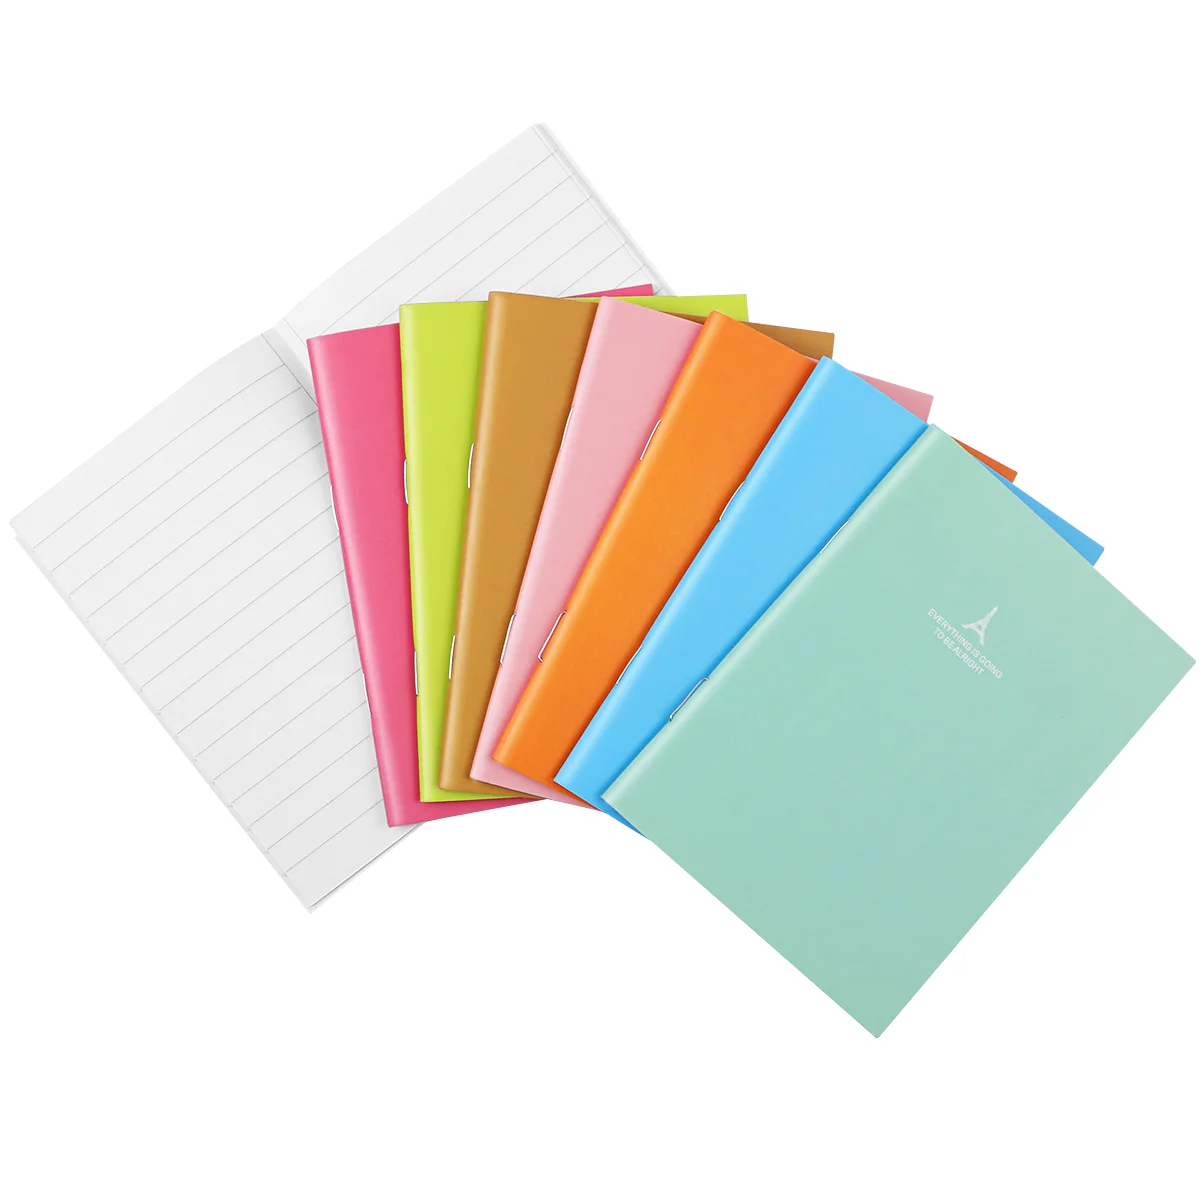 Candy Colors Notebook Memo, 24PCS Composition Notebook Steno Writing Pads Pocket Notebook for Home Diary Mini brands books